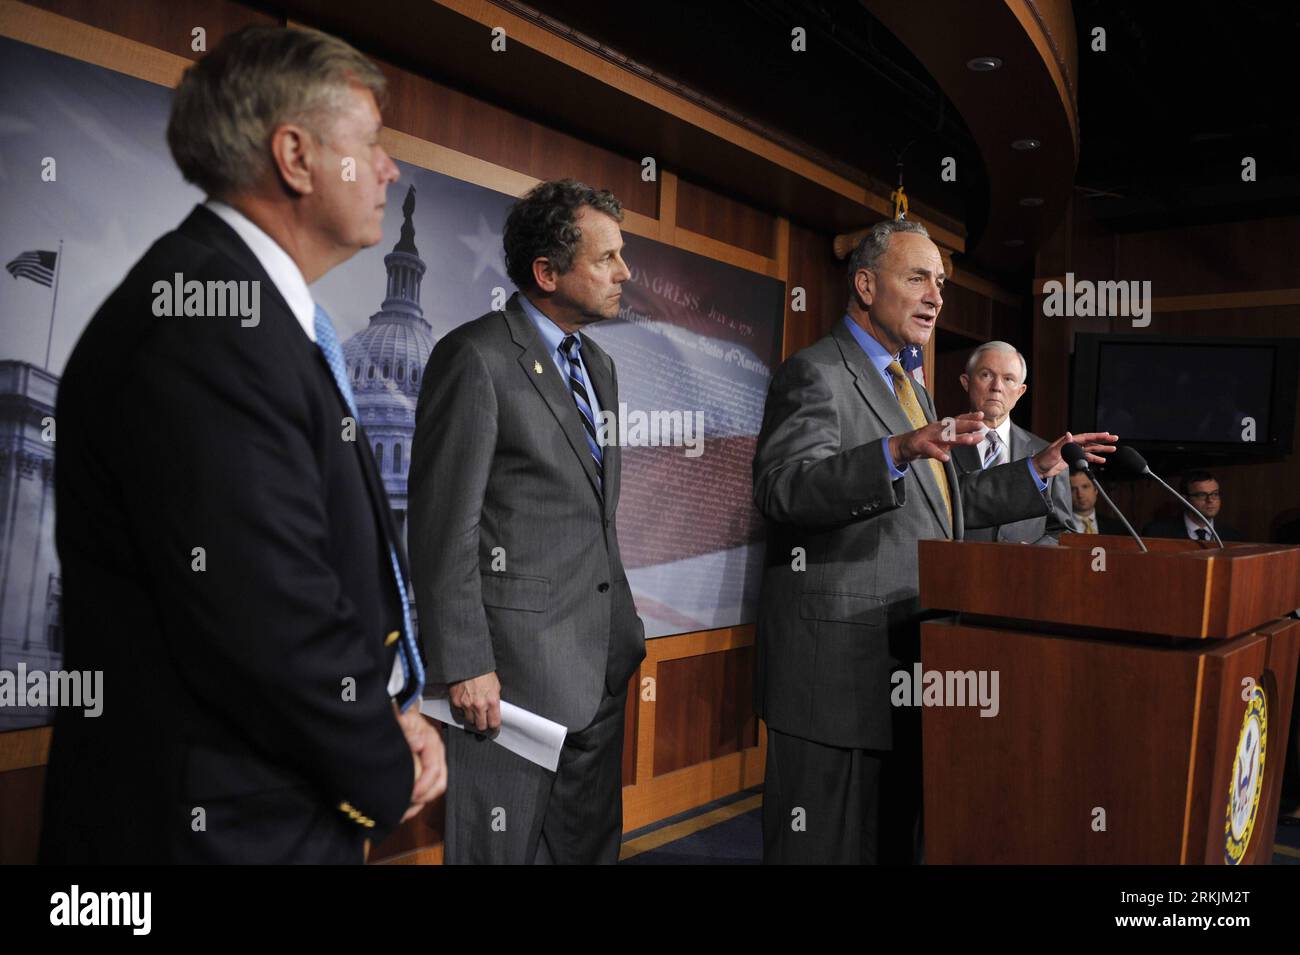 Bildnummer: 56143856  Datum: 03.10.2011  Copyright: imago/Xinhua (111004) -- WASHINGTON, Oct. 4, 2011 (Xinhua) -- (L-R) U.S. Senators Lindsey Graham, Sherrod Brown, Chuck Schumer and Jeff Sessions attend a press conference in Washington D.C., on Oct. 3, 2011. The U.S. Senate voted Monday to allow a debate on a controversial bill on so-called currency manipulation by China amid strong opposition from China and U.S. business groups. (Xinhua/Zhang Jun) (nxl) US-WASHINGTON-SENATE-EXCHANGE RATE-PRESS CONFERENCE PUBLICATIONxNOTxINxCHN People Politik xjh x0x premiumd 2011 quer      56143856 Date 03 1 Stock Photo